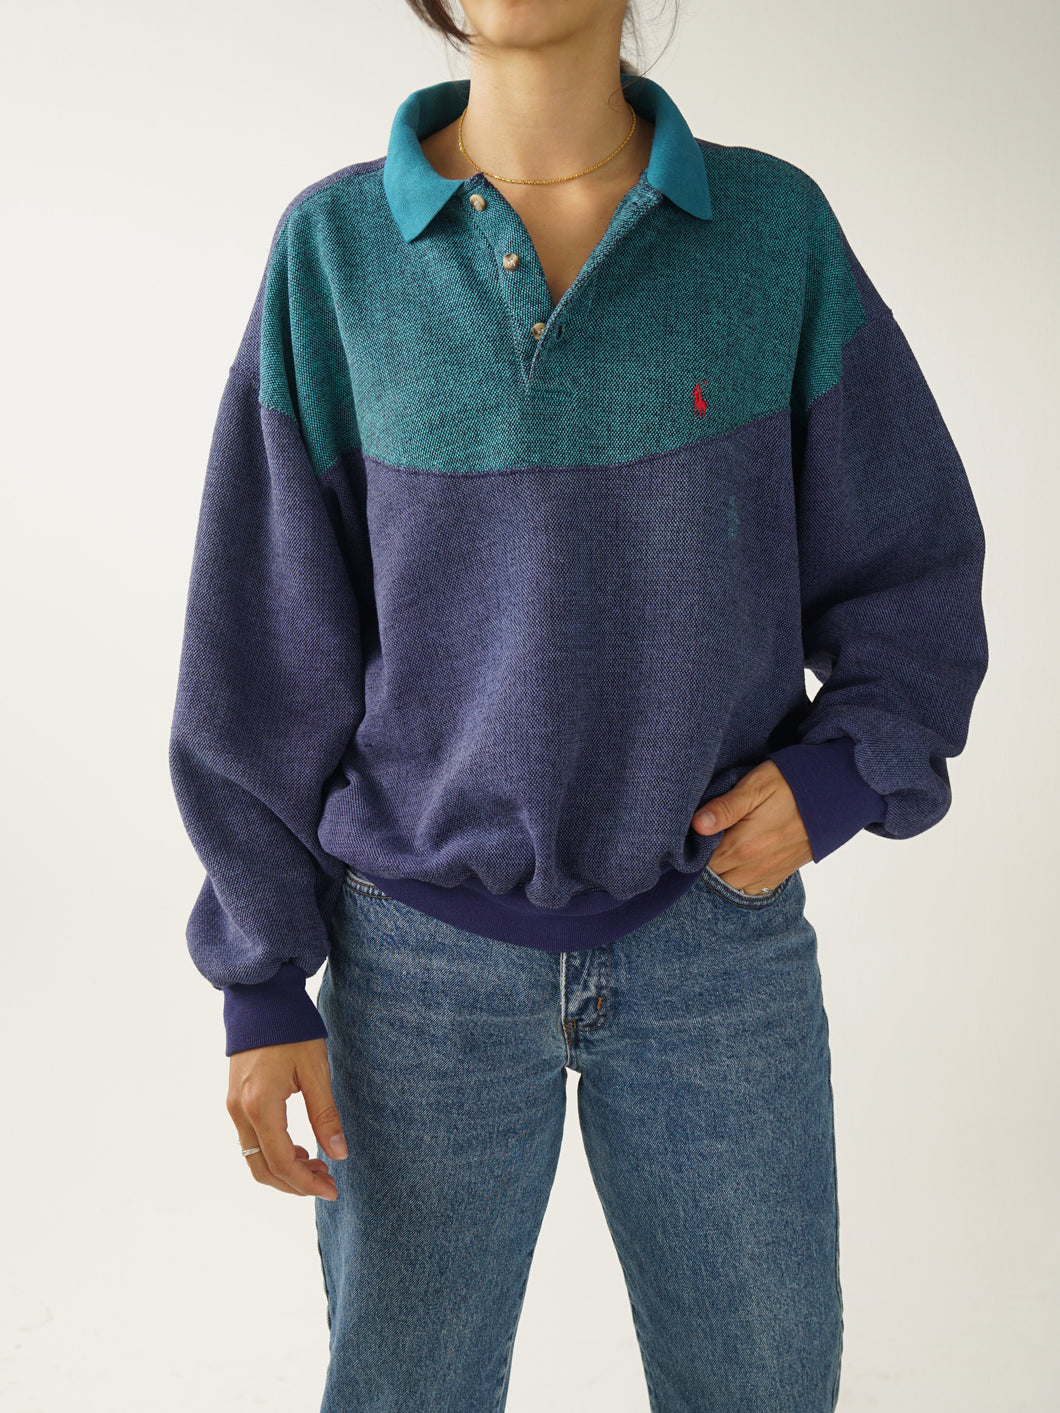 Polo by Ralph Lauren blue and turquoie long sleeve